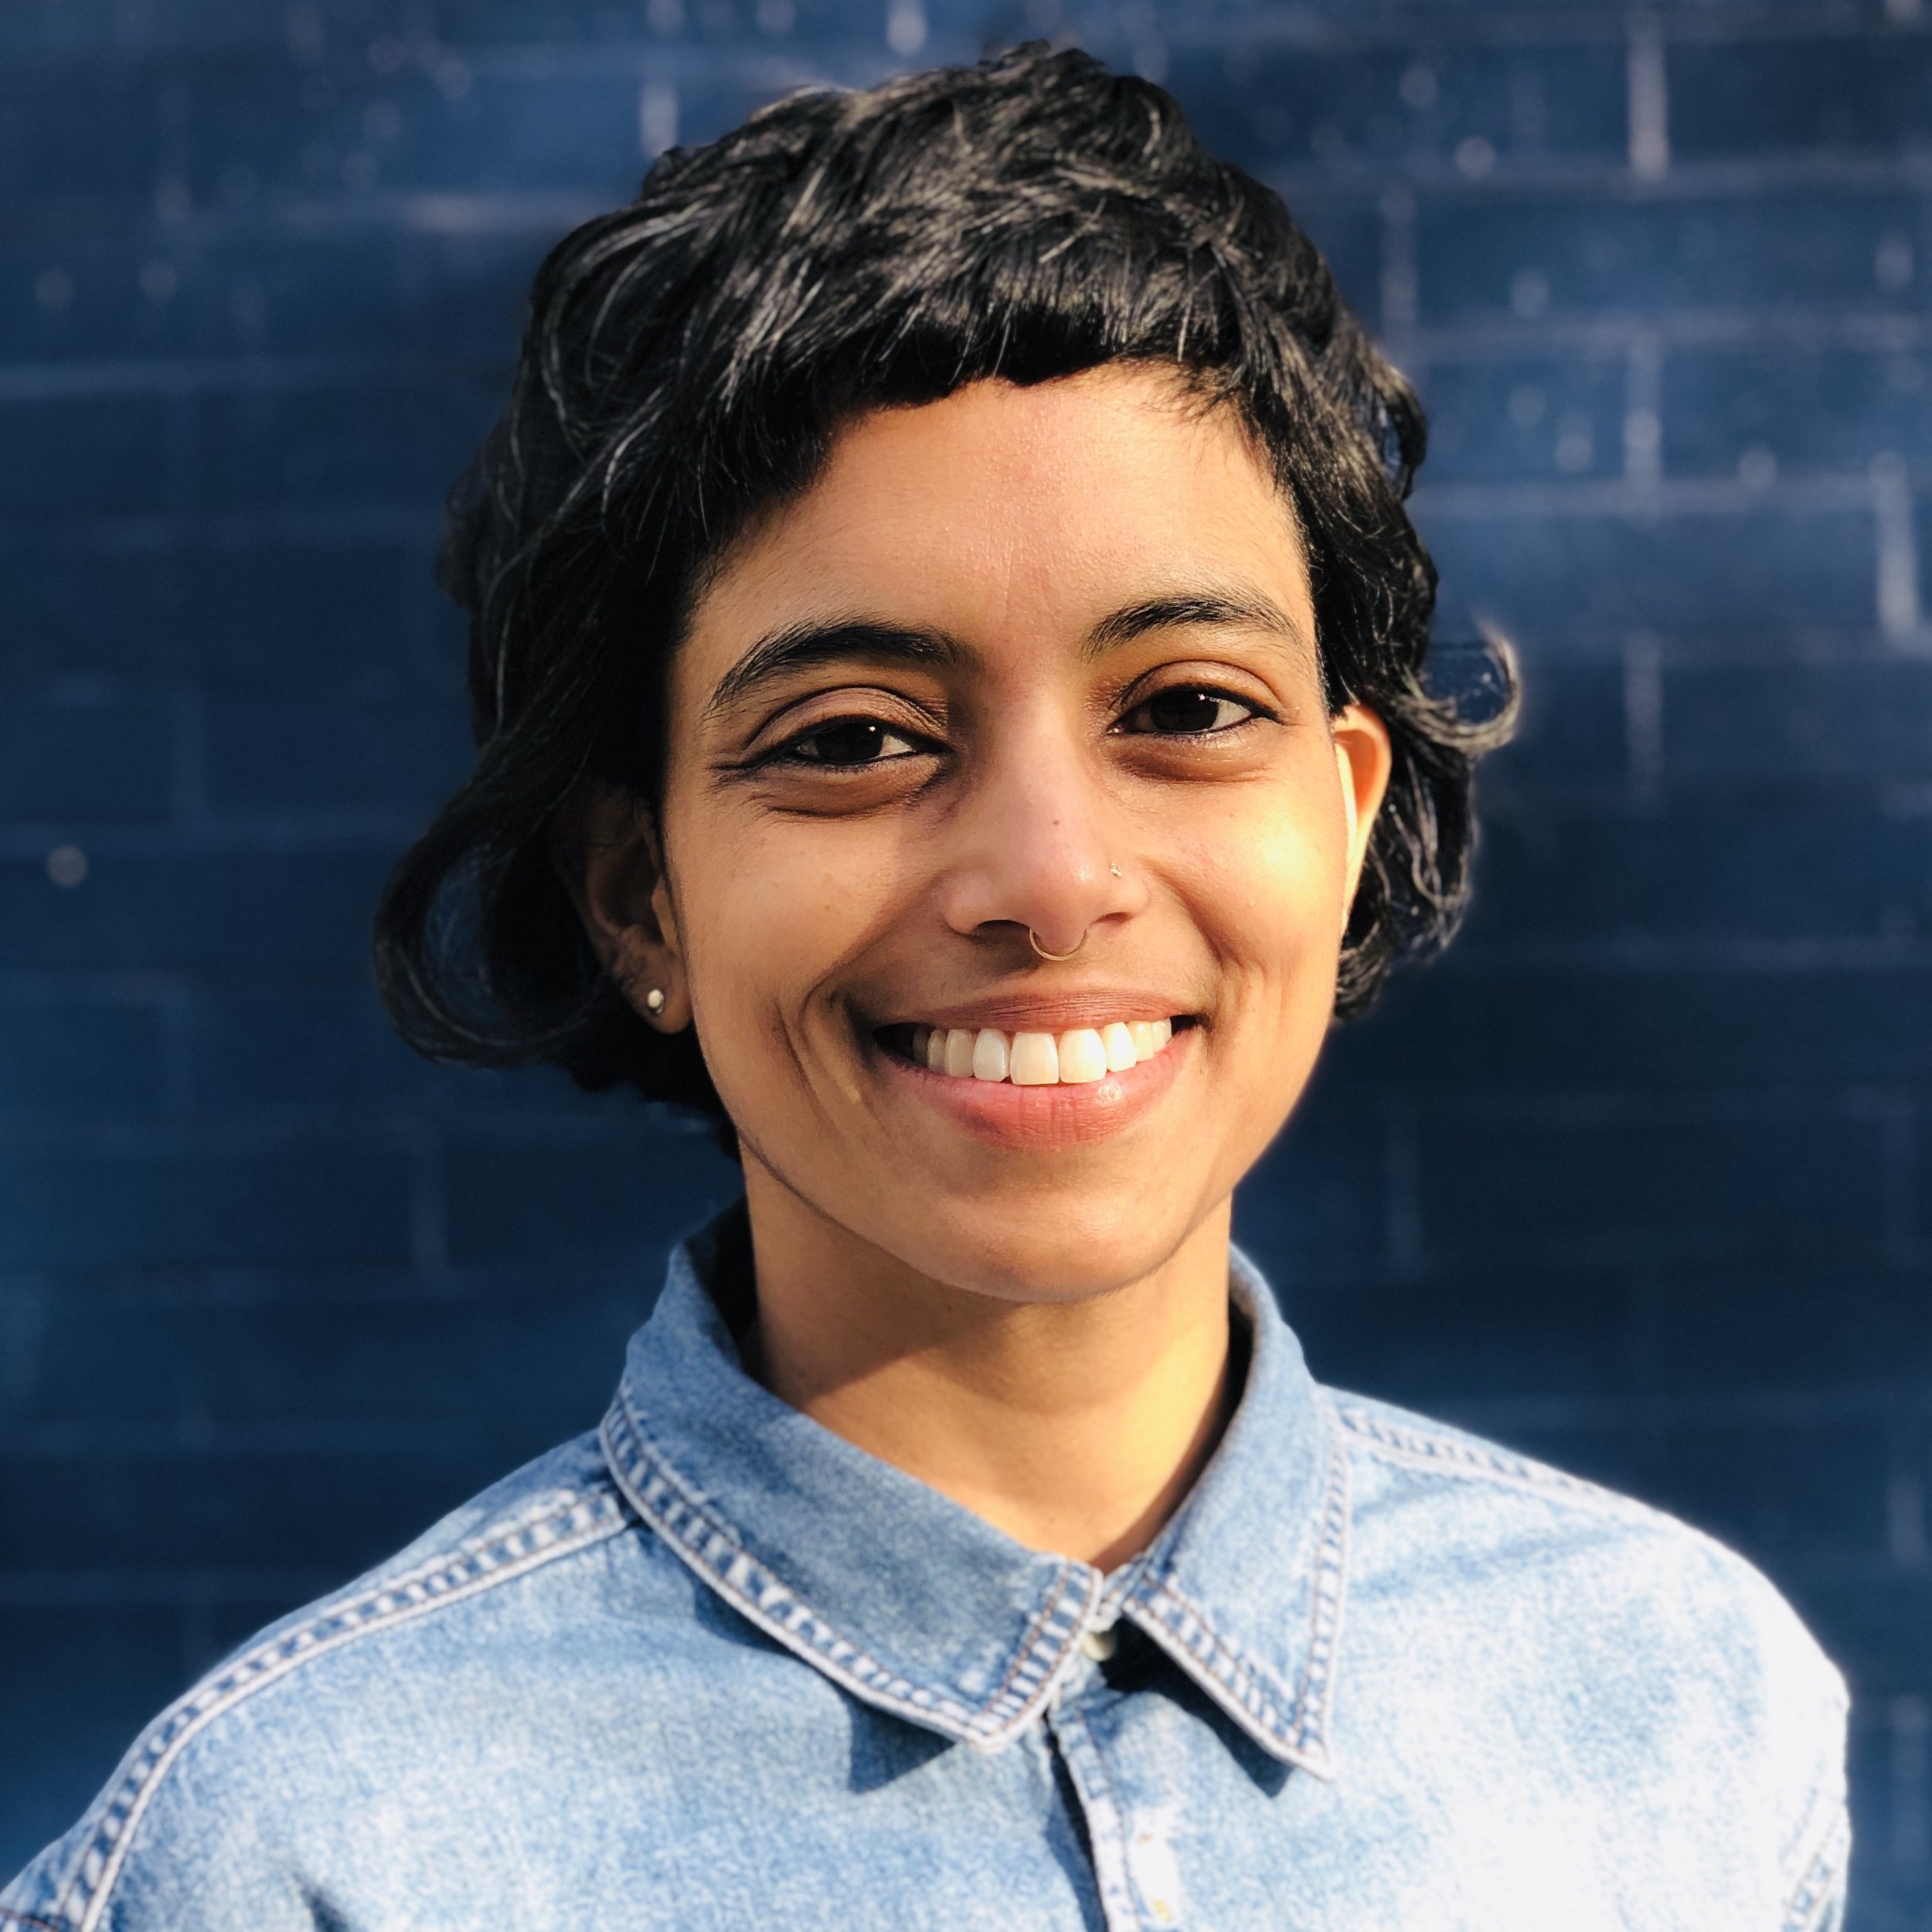 Queer Therapist of Color NYC — deesha narichania, Therapist + Consultant